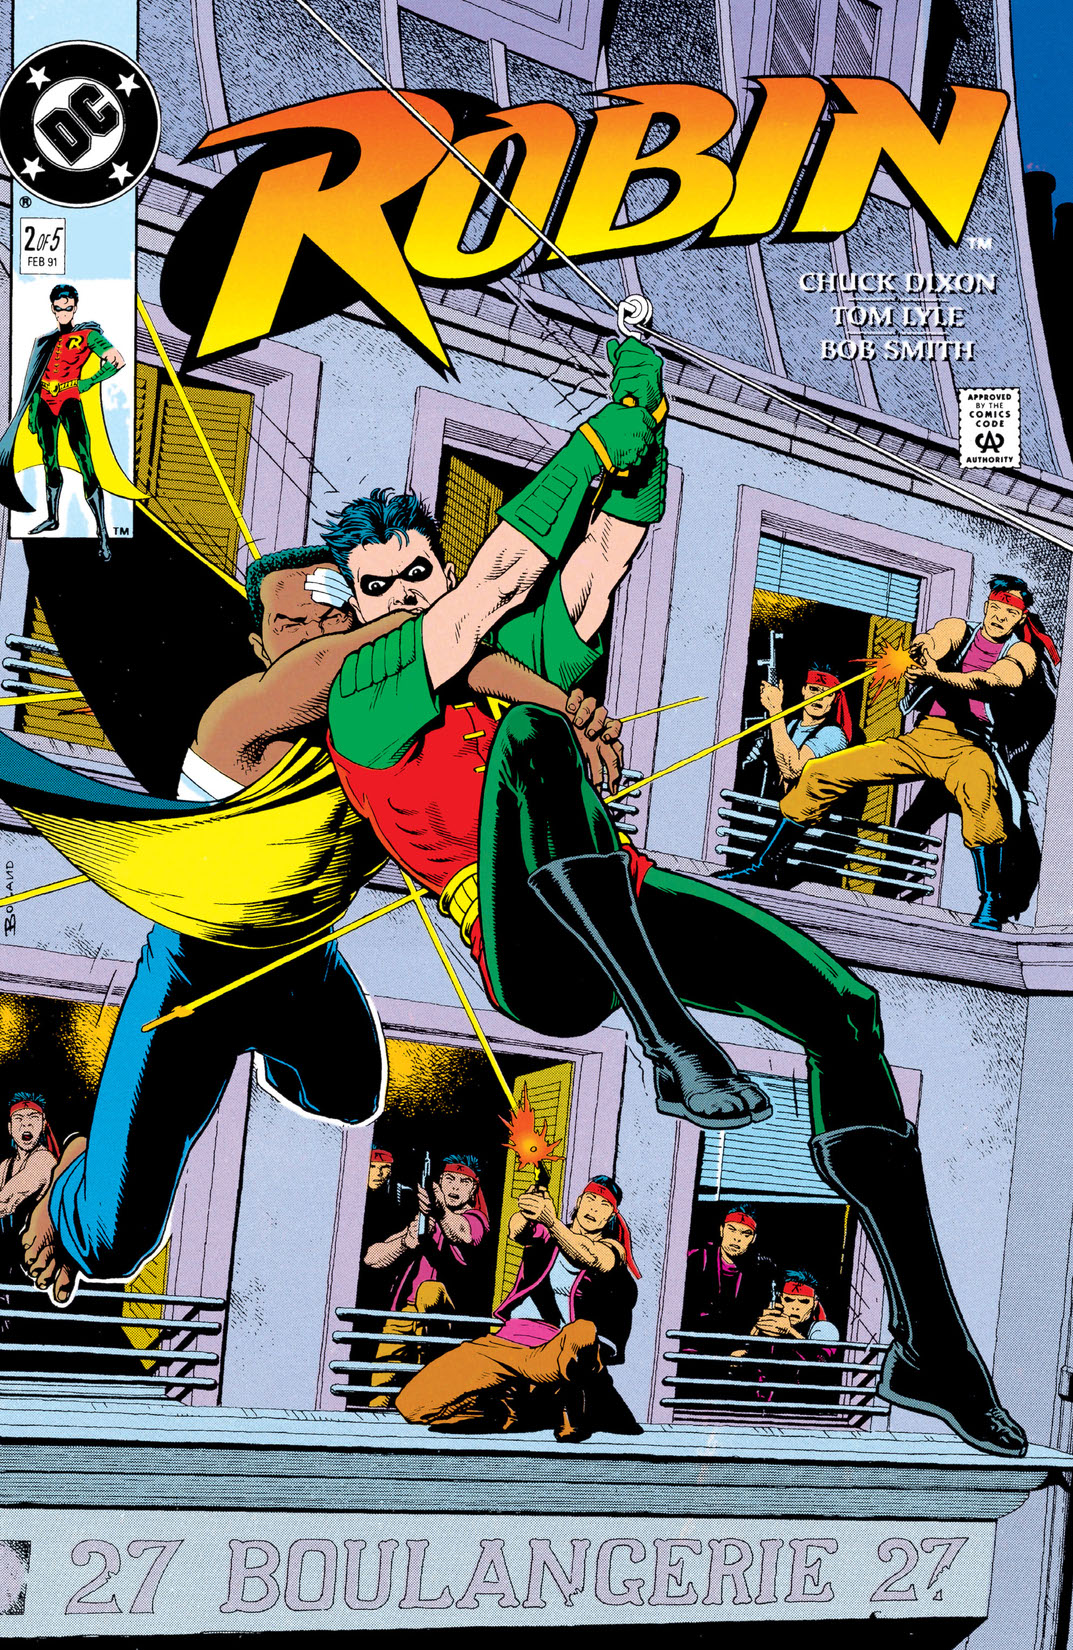 Robin Mini-Series (1990-) #2 preview images